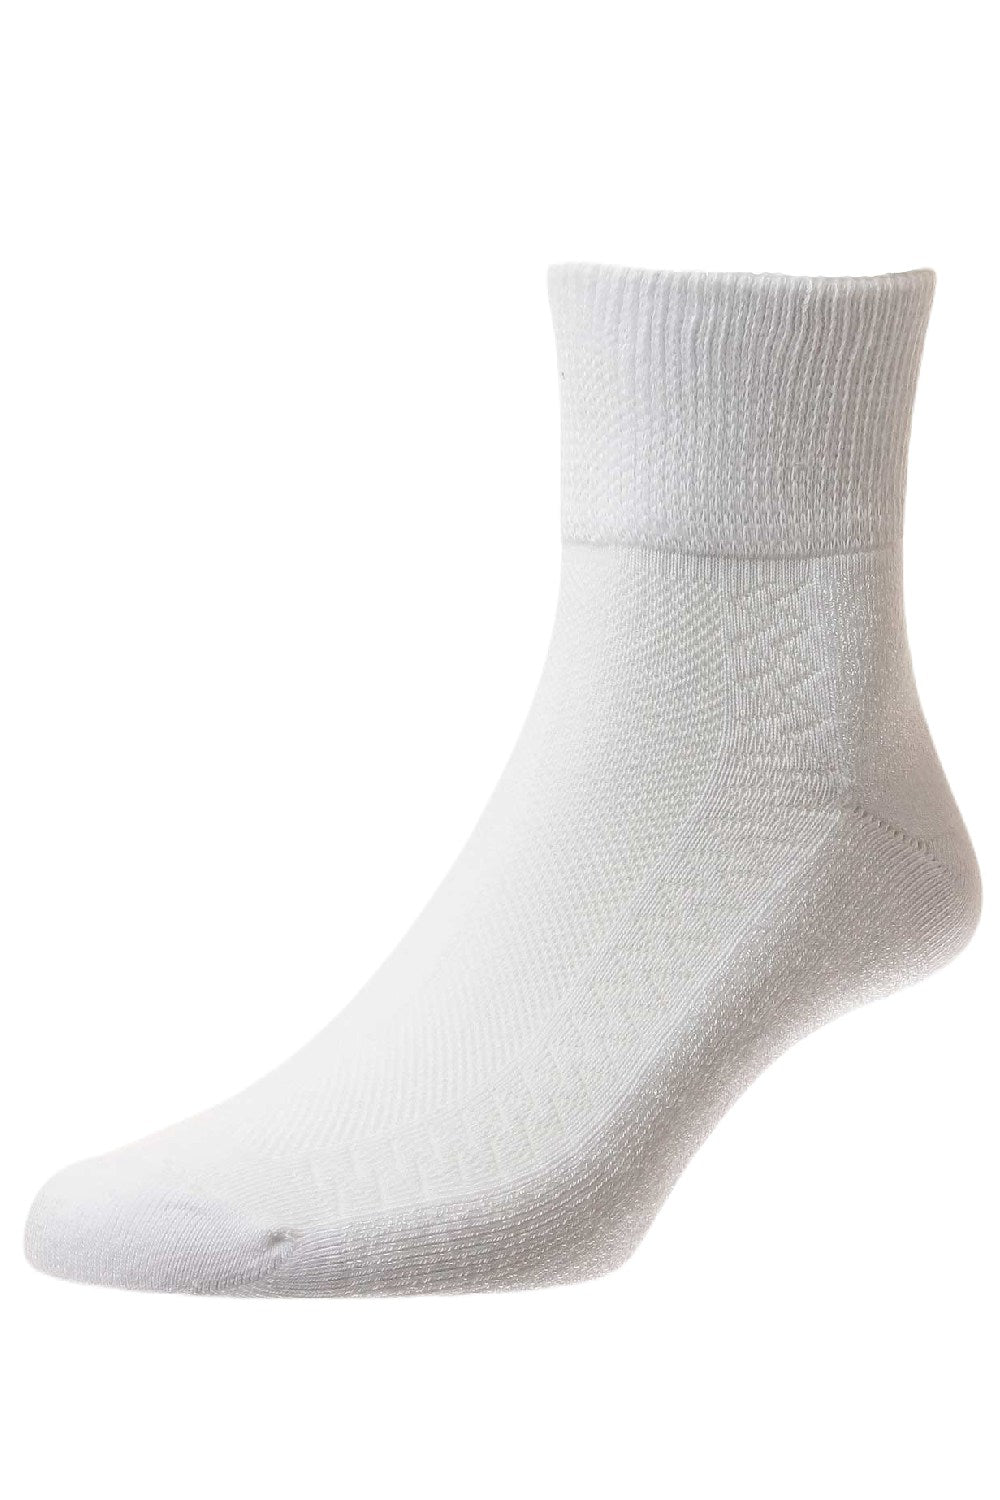 HJ Hall Diabetic Low Rise Cotton Socks in White 